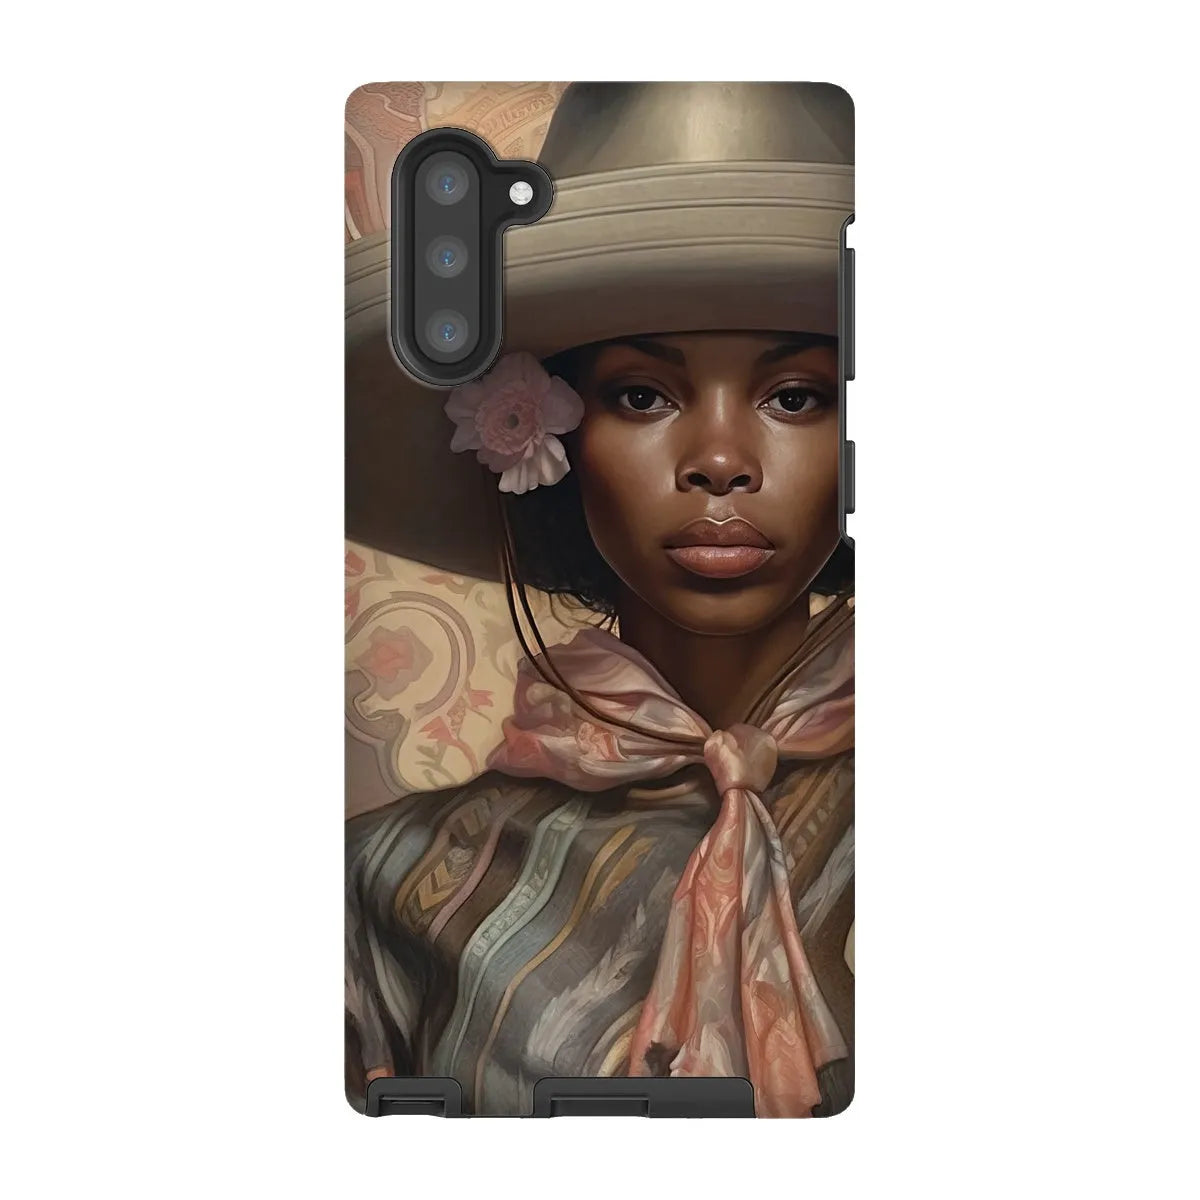 Sadie The Lesbian Cowgirl - Sapphic Art Phone Case - Samsung Galaxy Note 10 / Matte - Mobile Phone Cases - Aesthetic Art